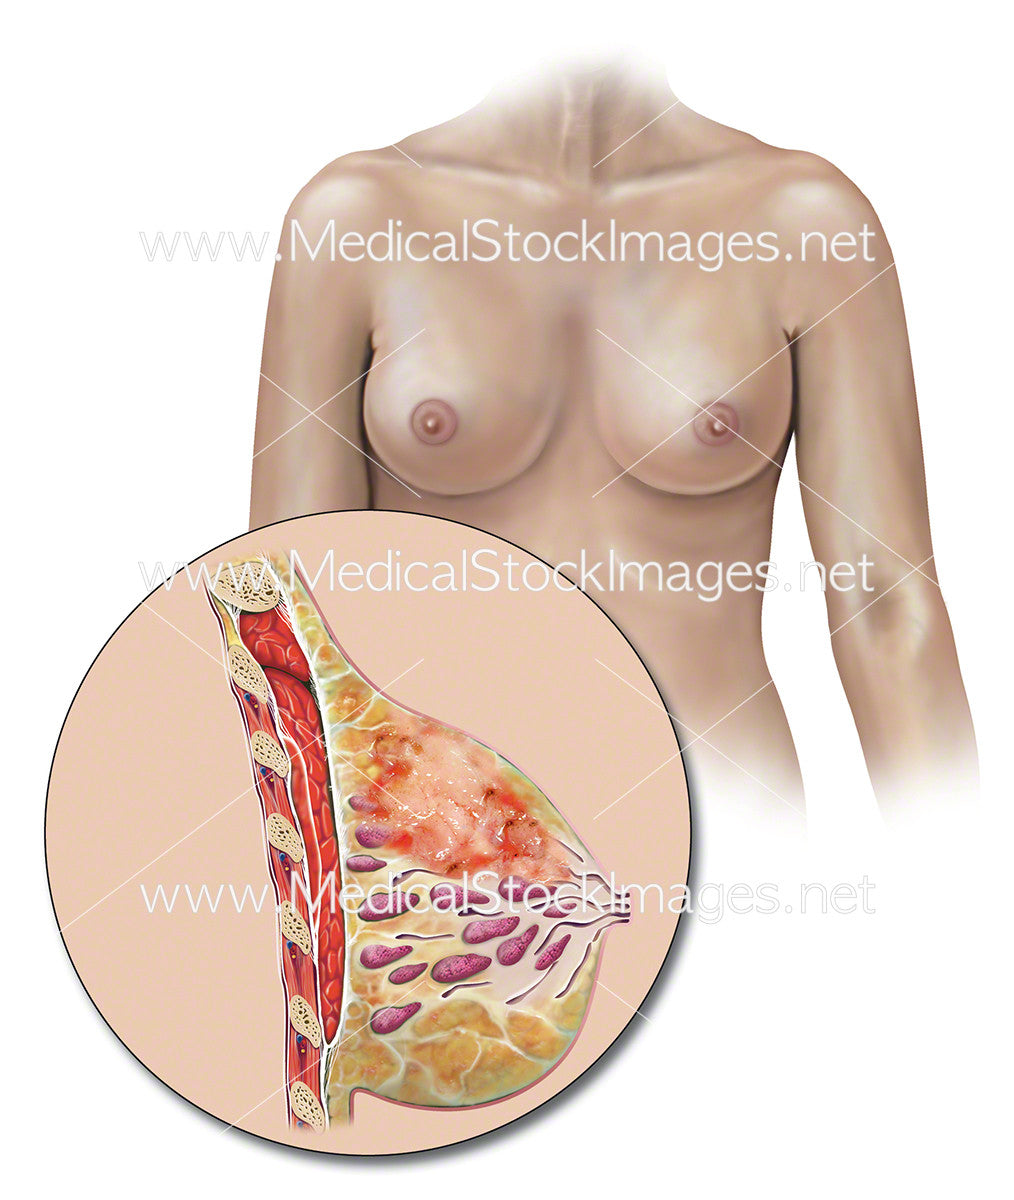 Female Body with Breast and Tumour in Cross Section – Medical Stock Images  Company